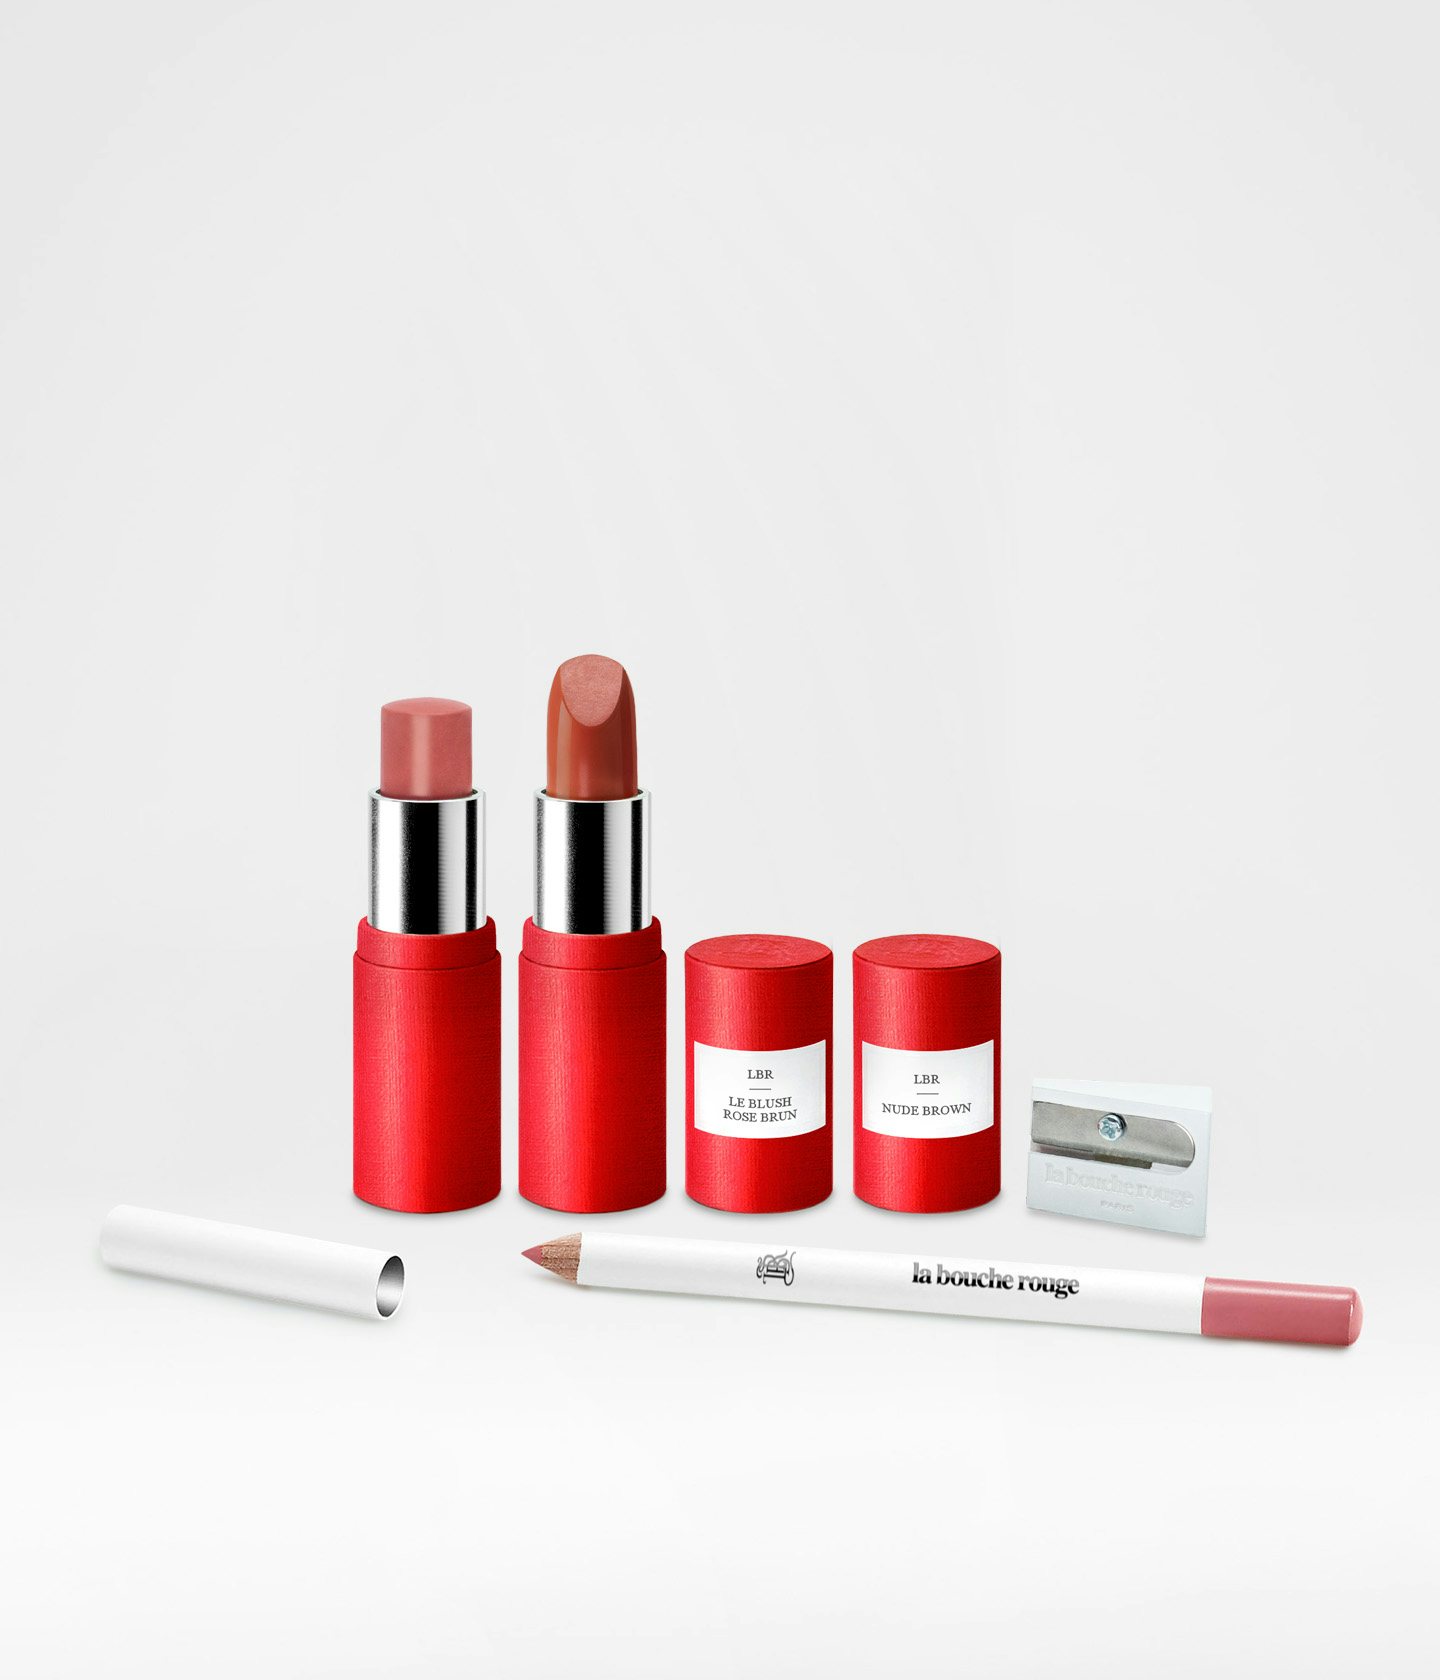 La bouche rouge The Spring Routine assortment of products